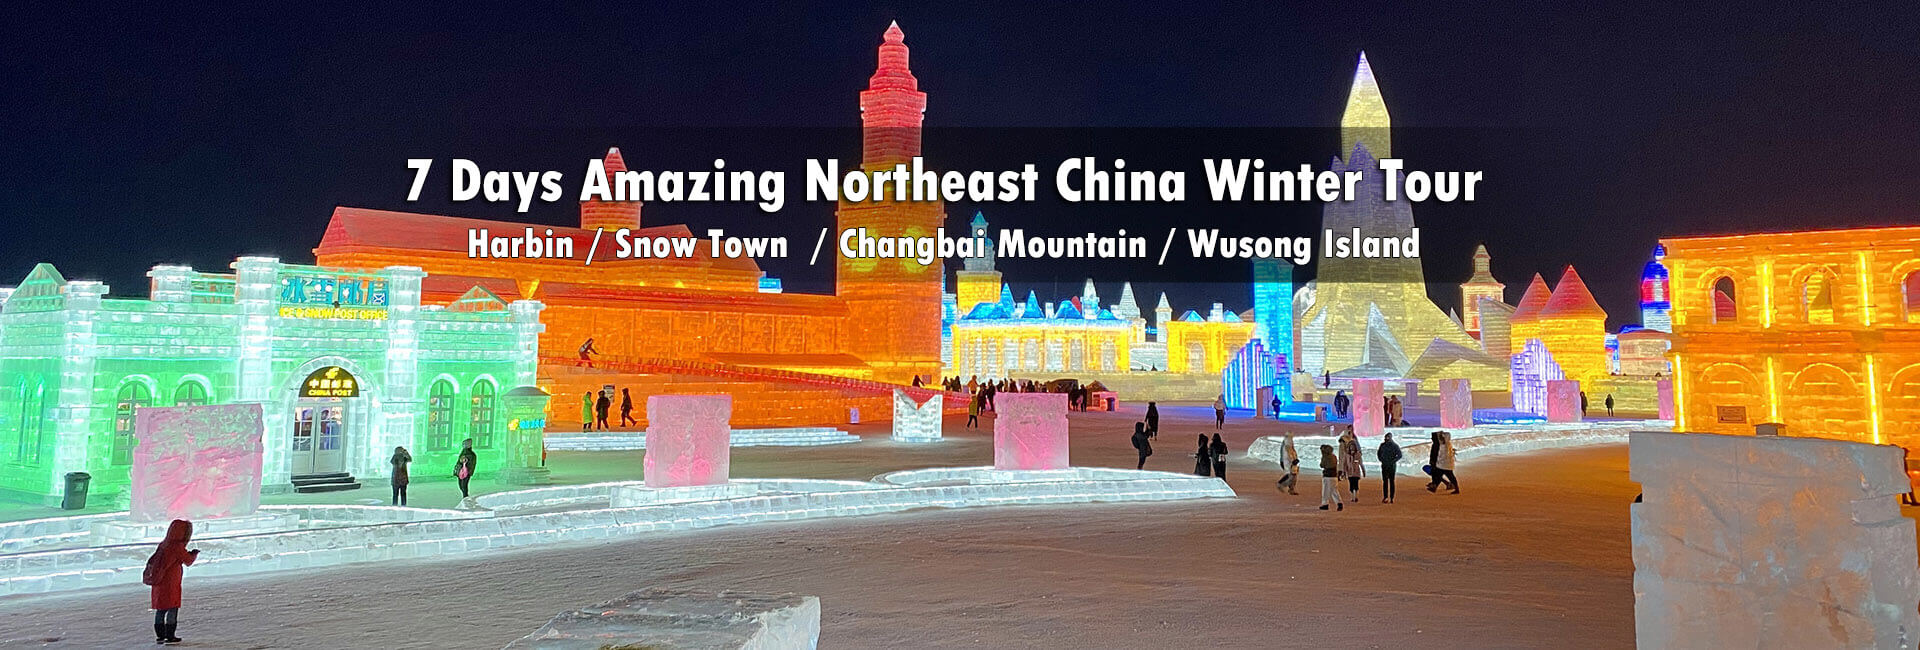 Northeastern 2022 2023 Calendar Best Dongbei Tours & Valuable Northeastern China Tours 2022/2023